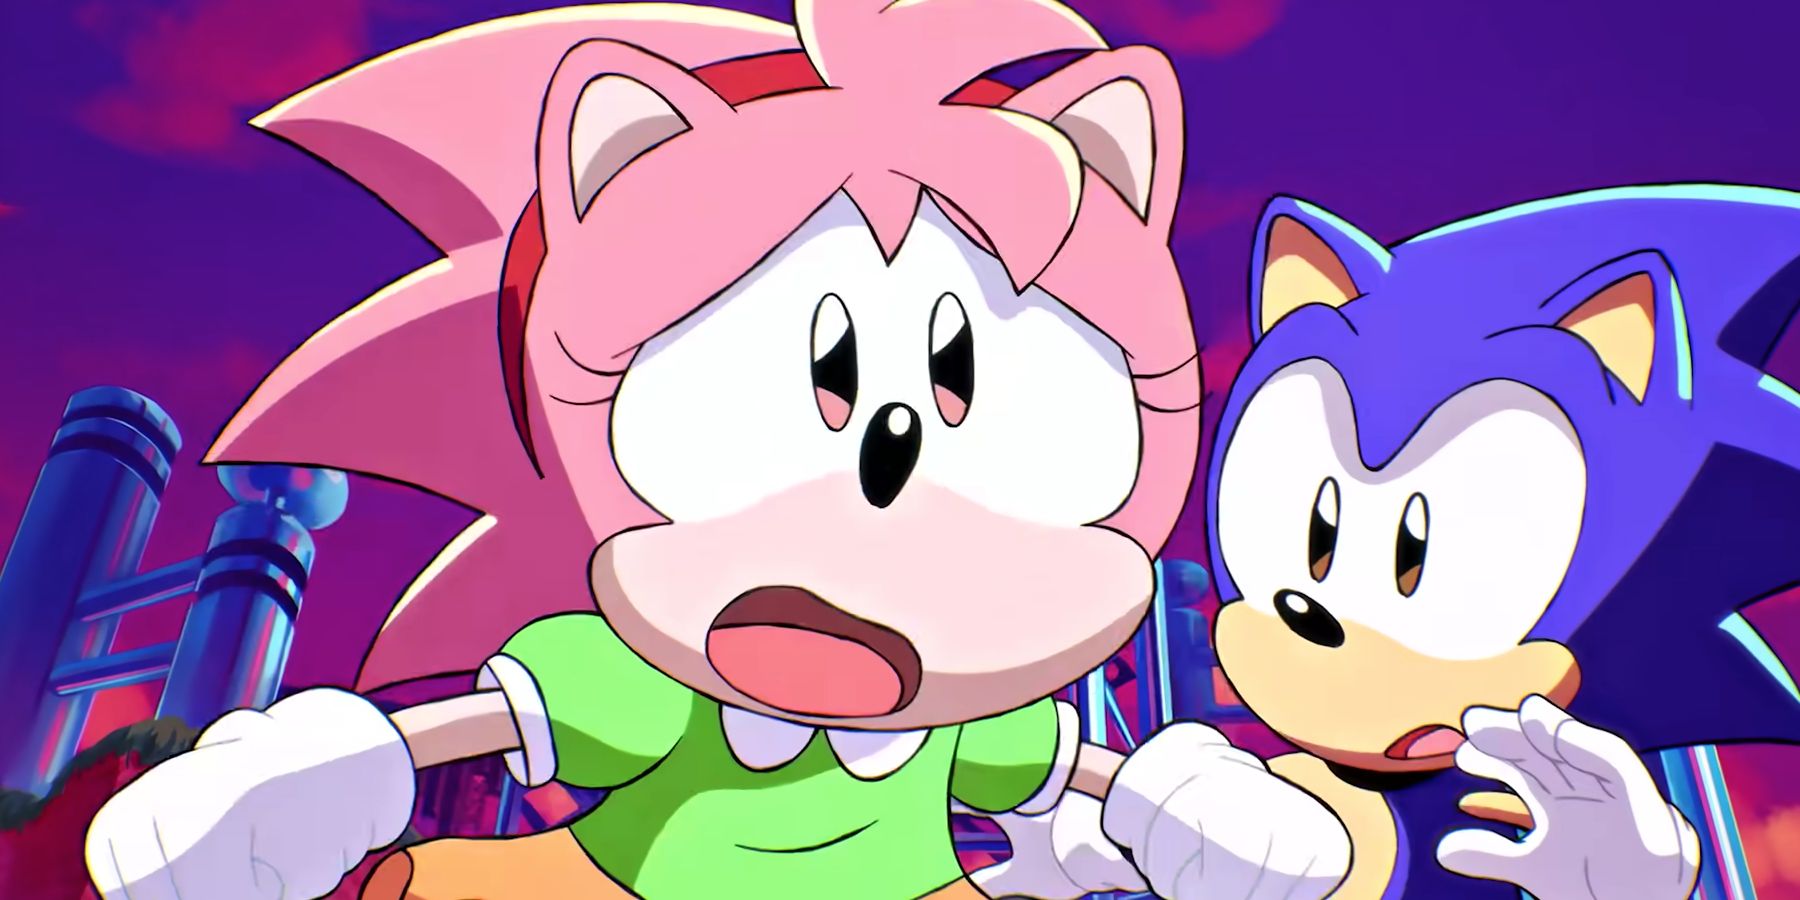 Sonic Origins Plus Adds Amy As Playable Character, Game Gear Games, And  More This June - Game Informer